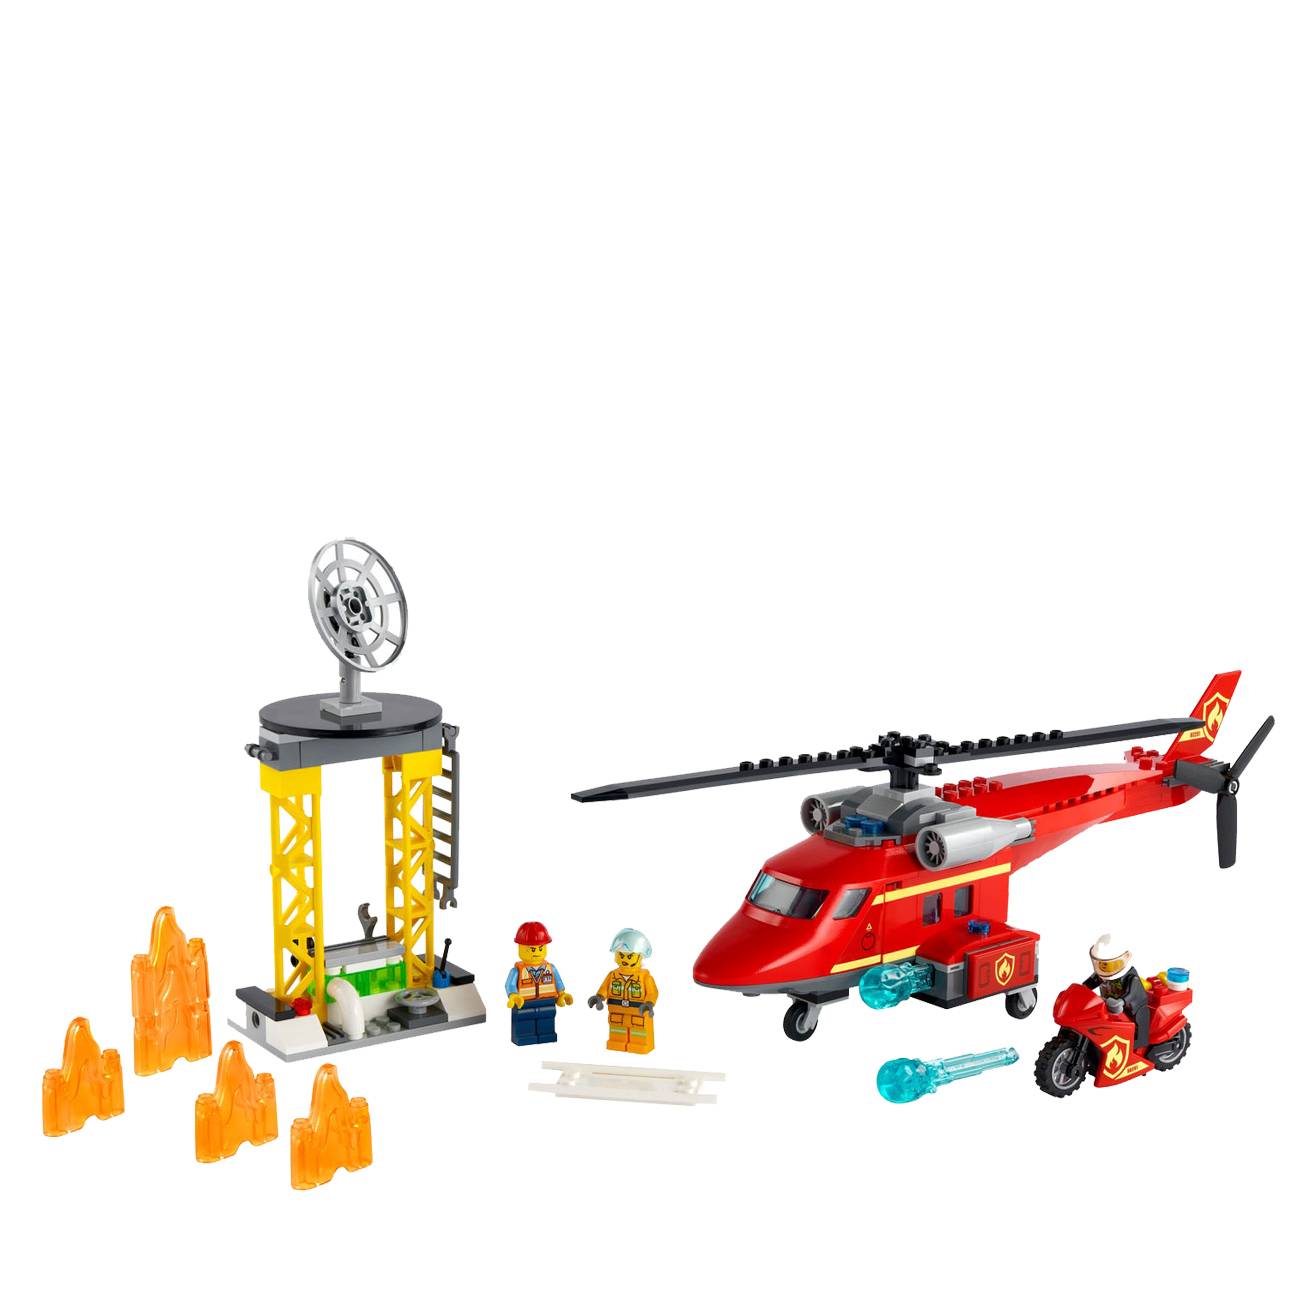 City Fire Rescue Helicopter 60281